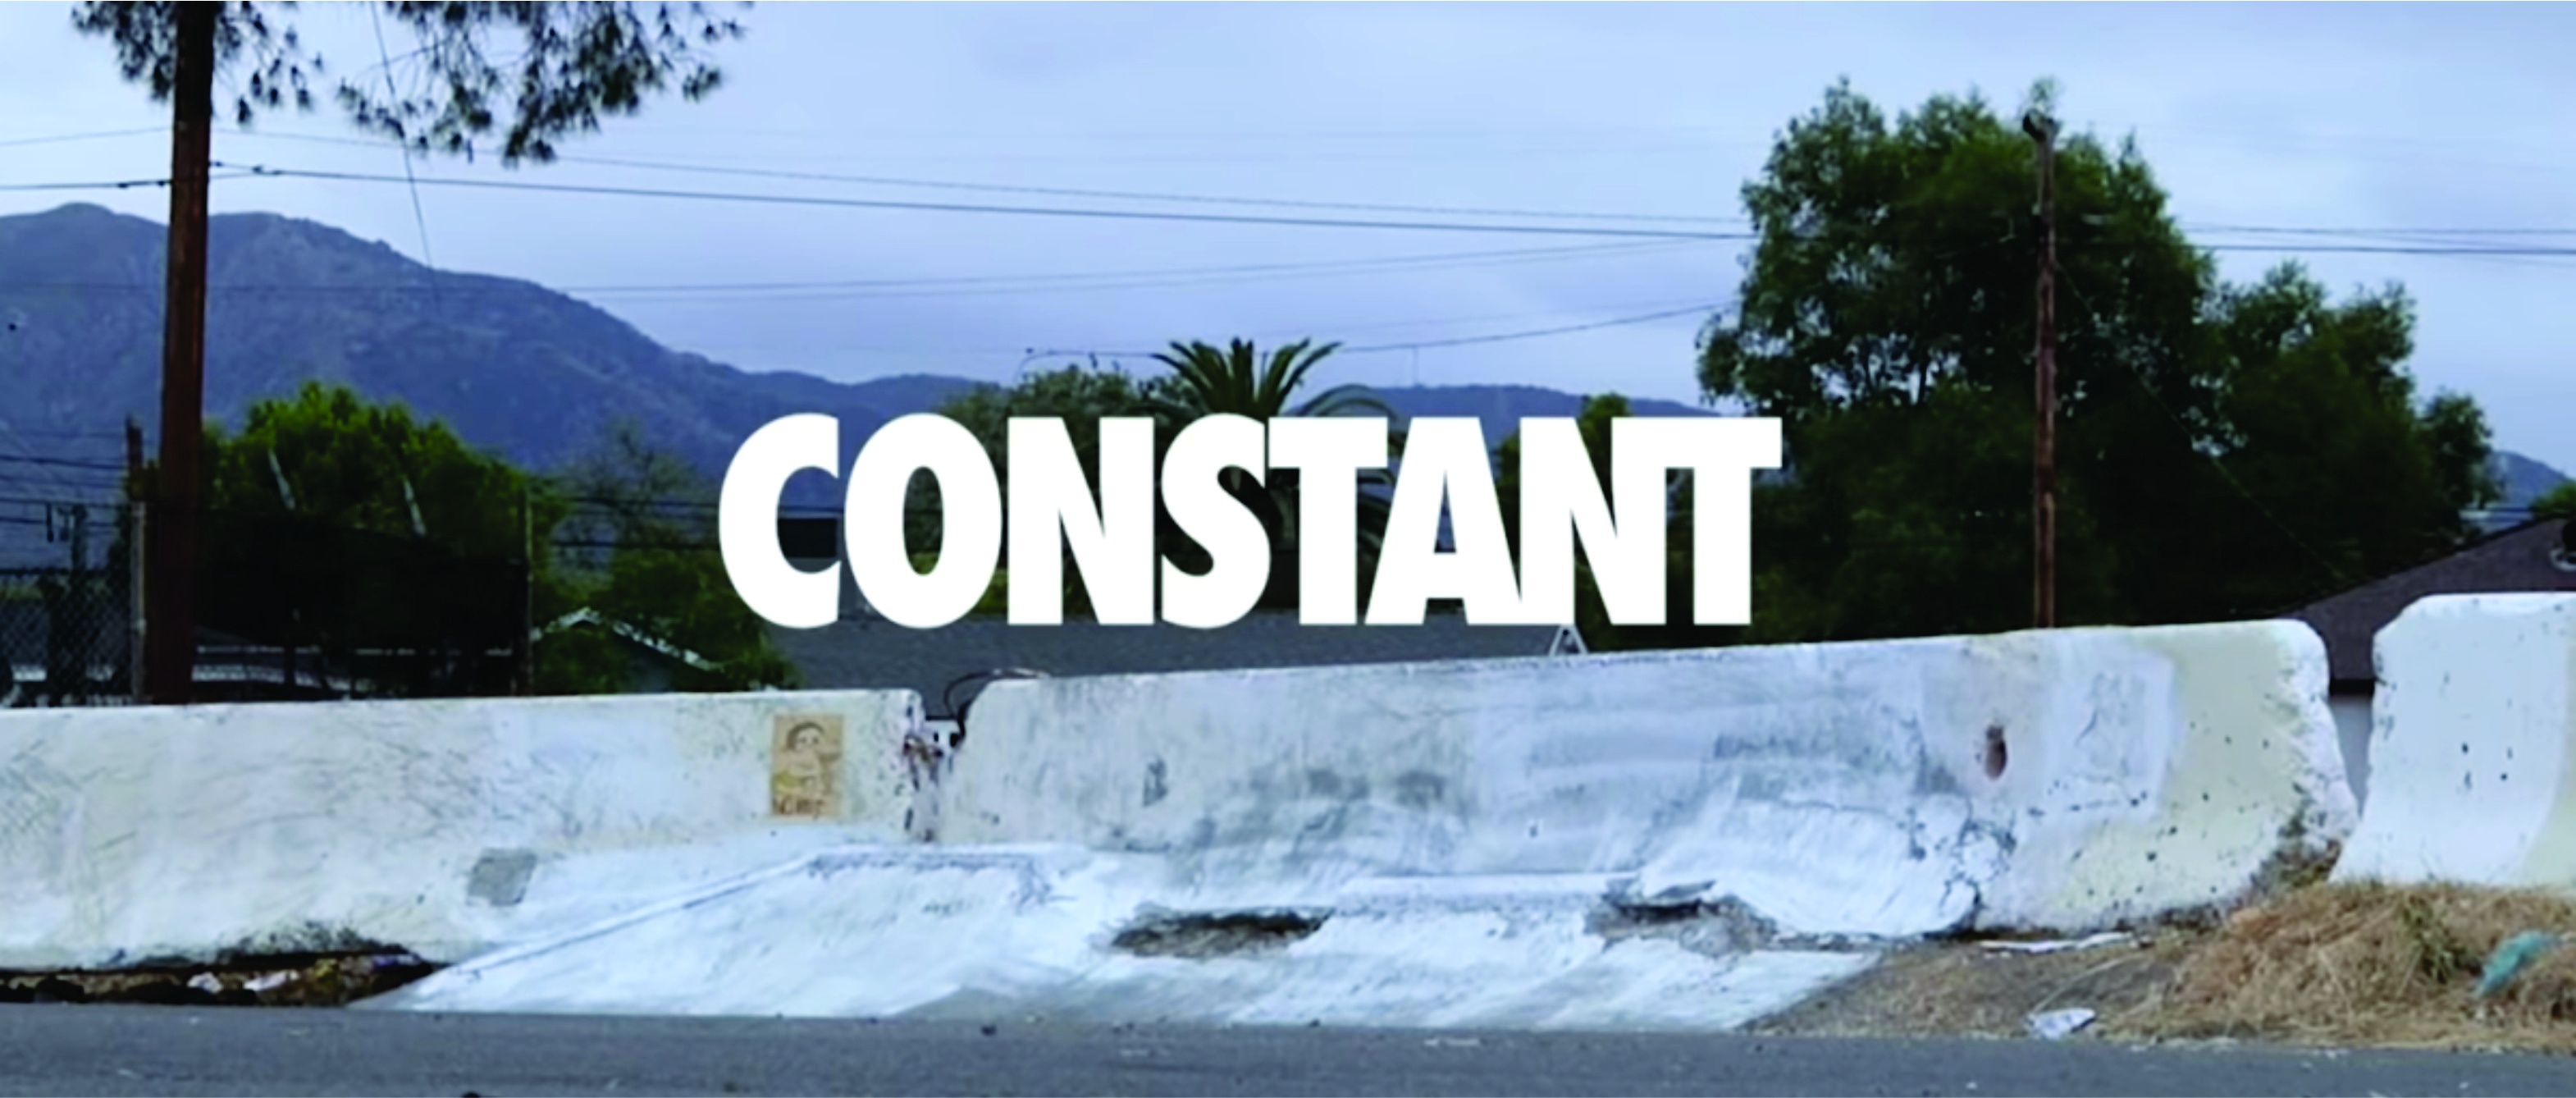 Nike SB - Constant cover